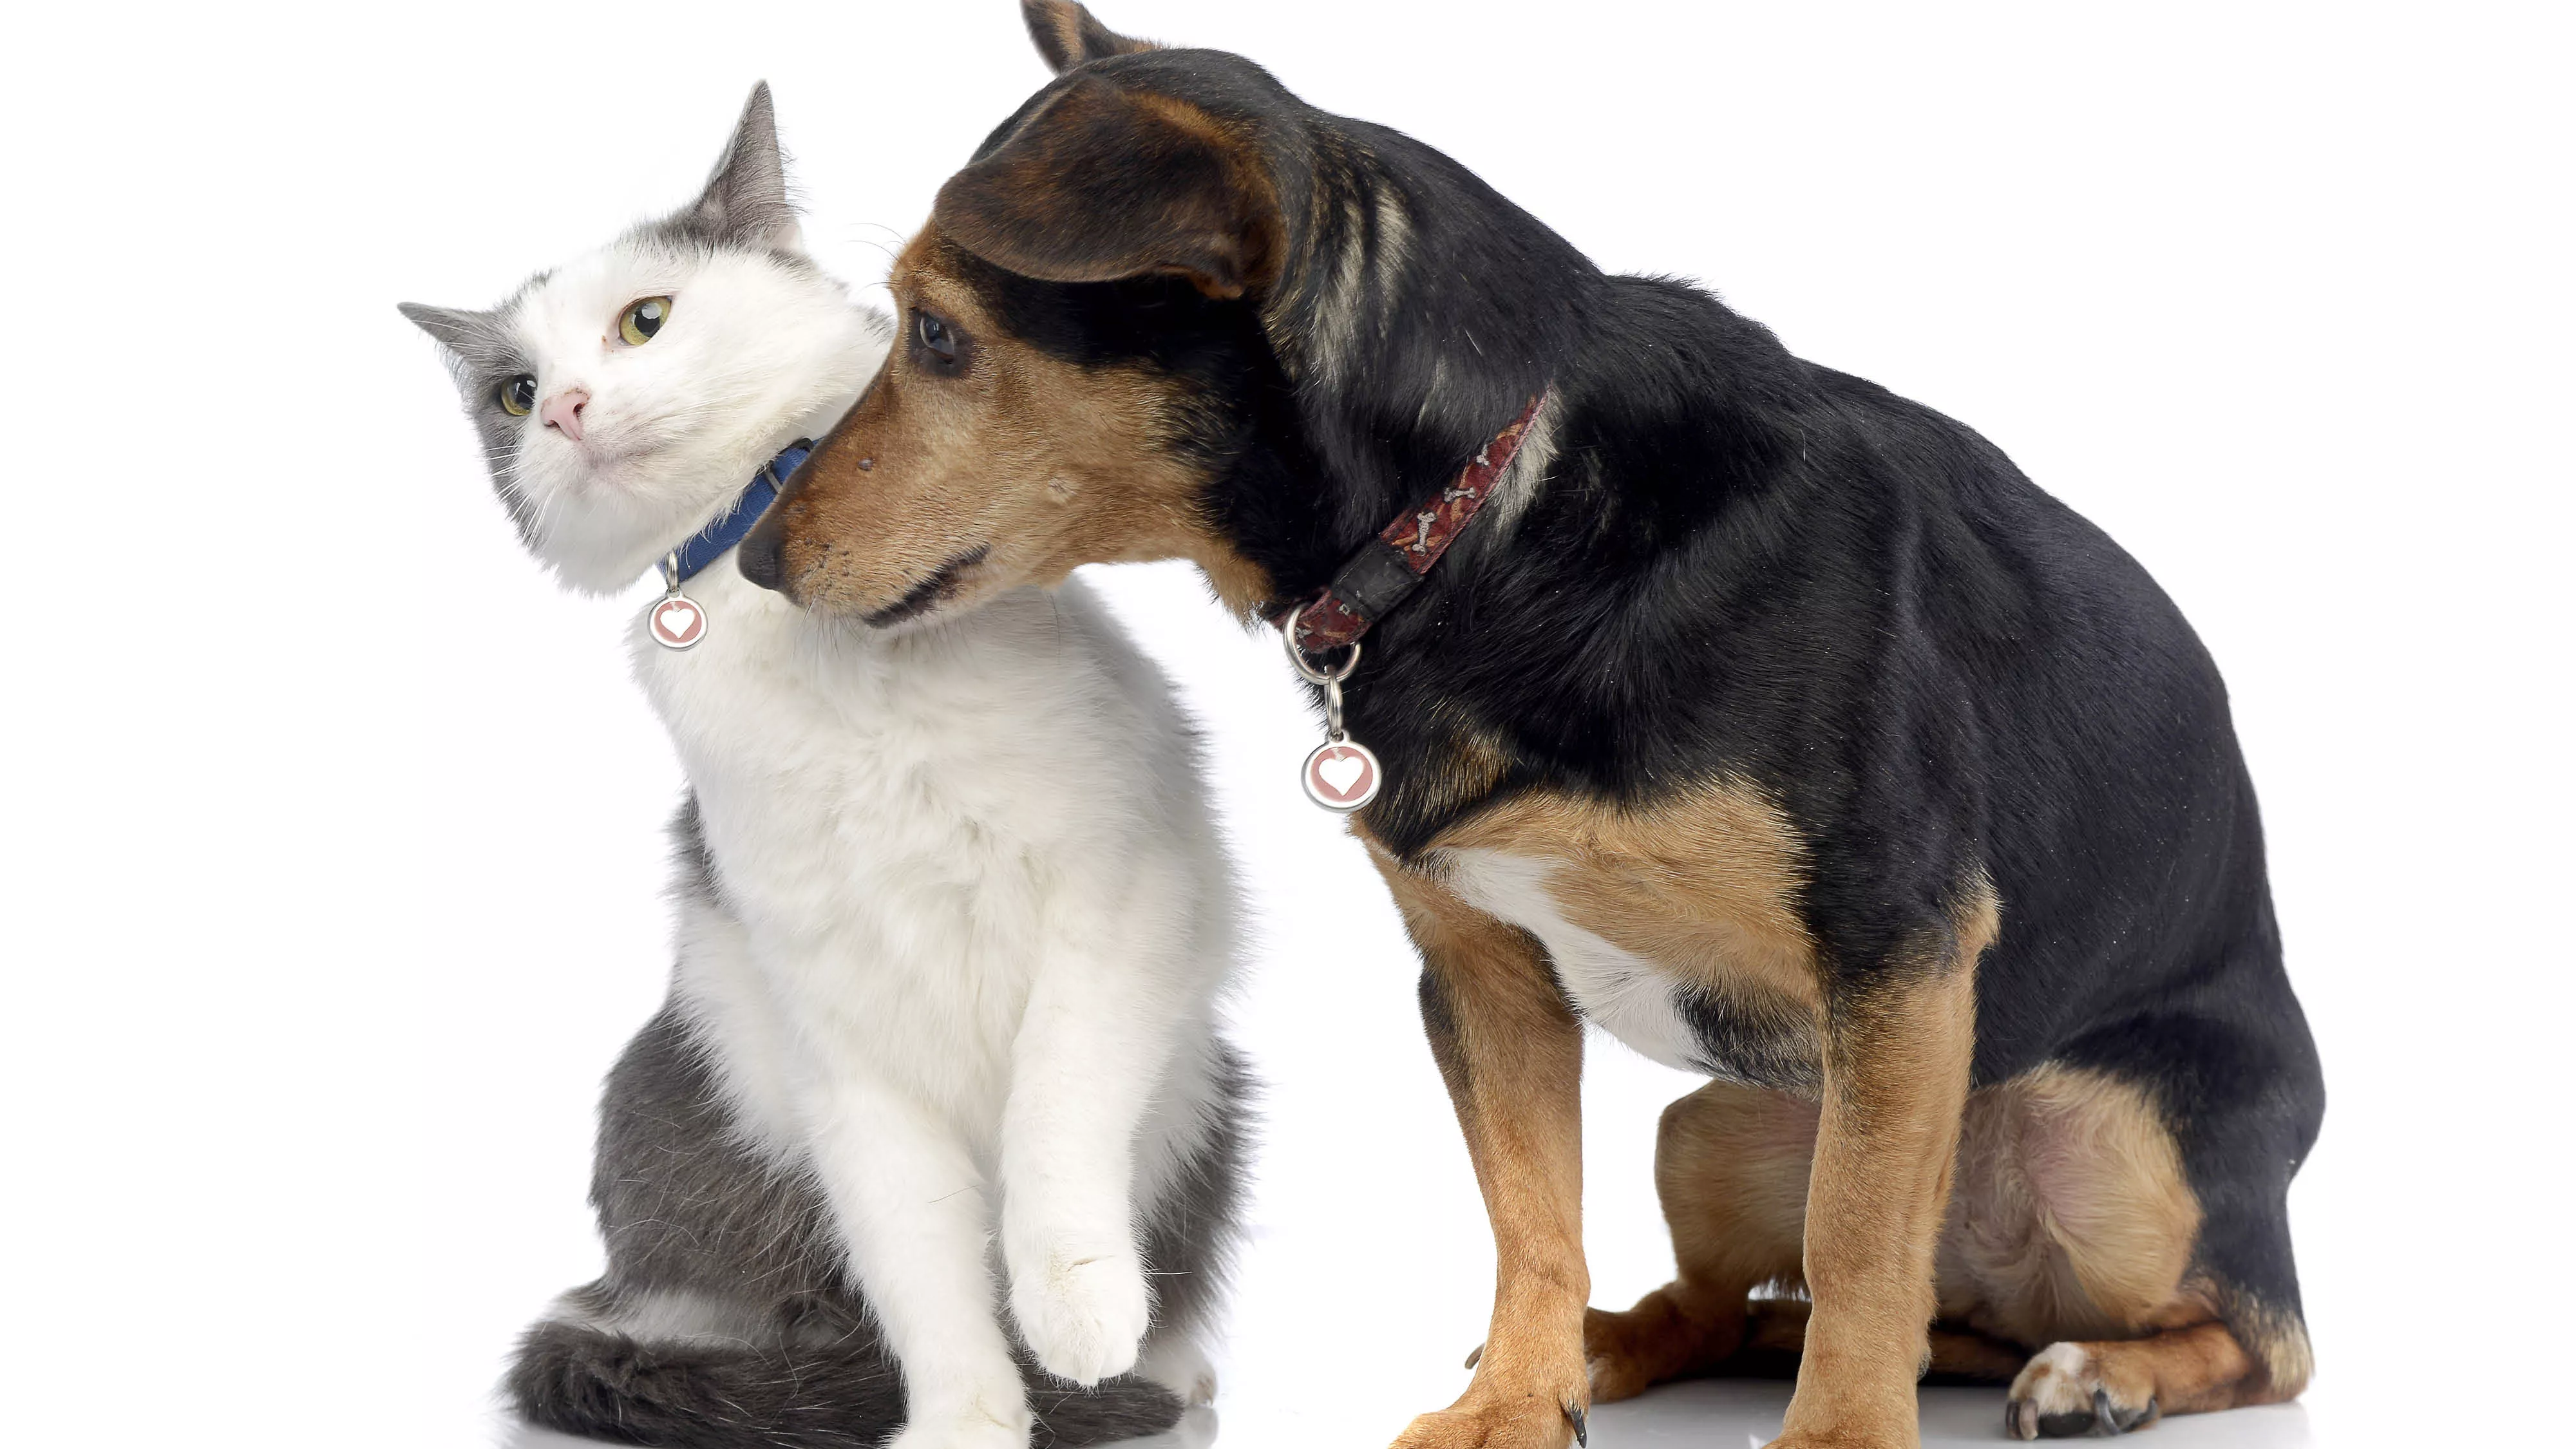 Dog and cat sitting next to each other with dog sniffing cat